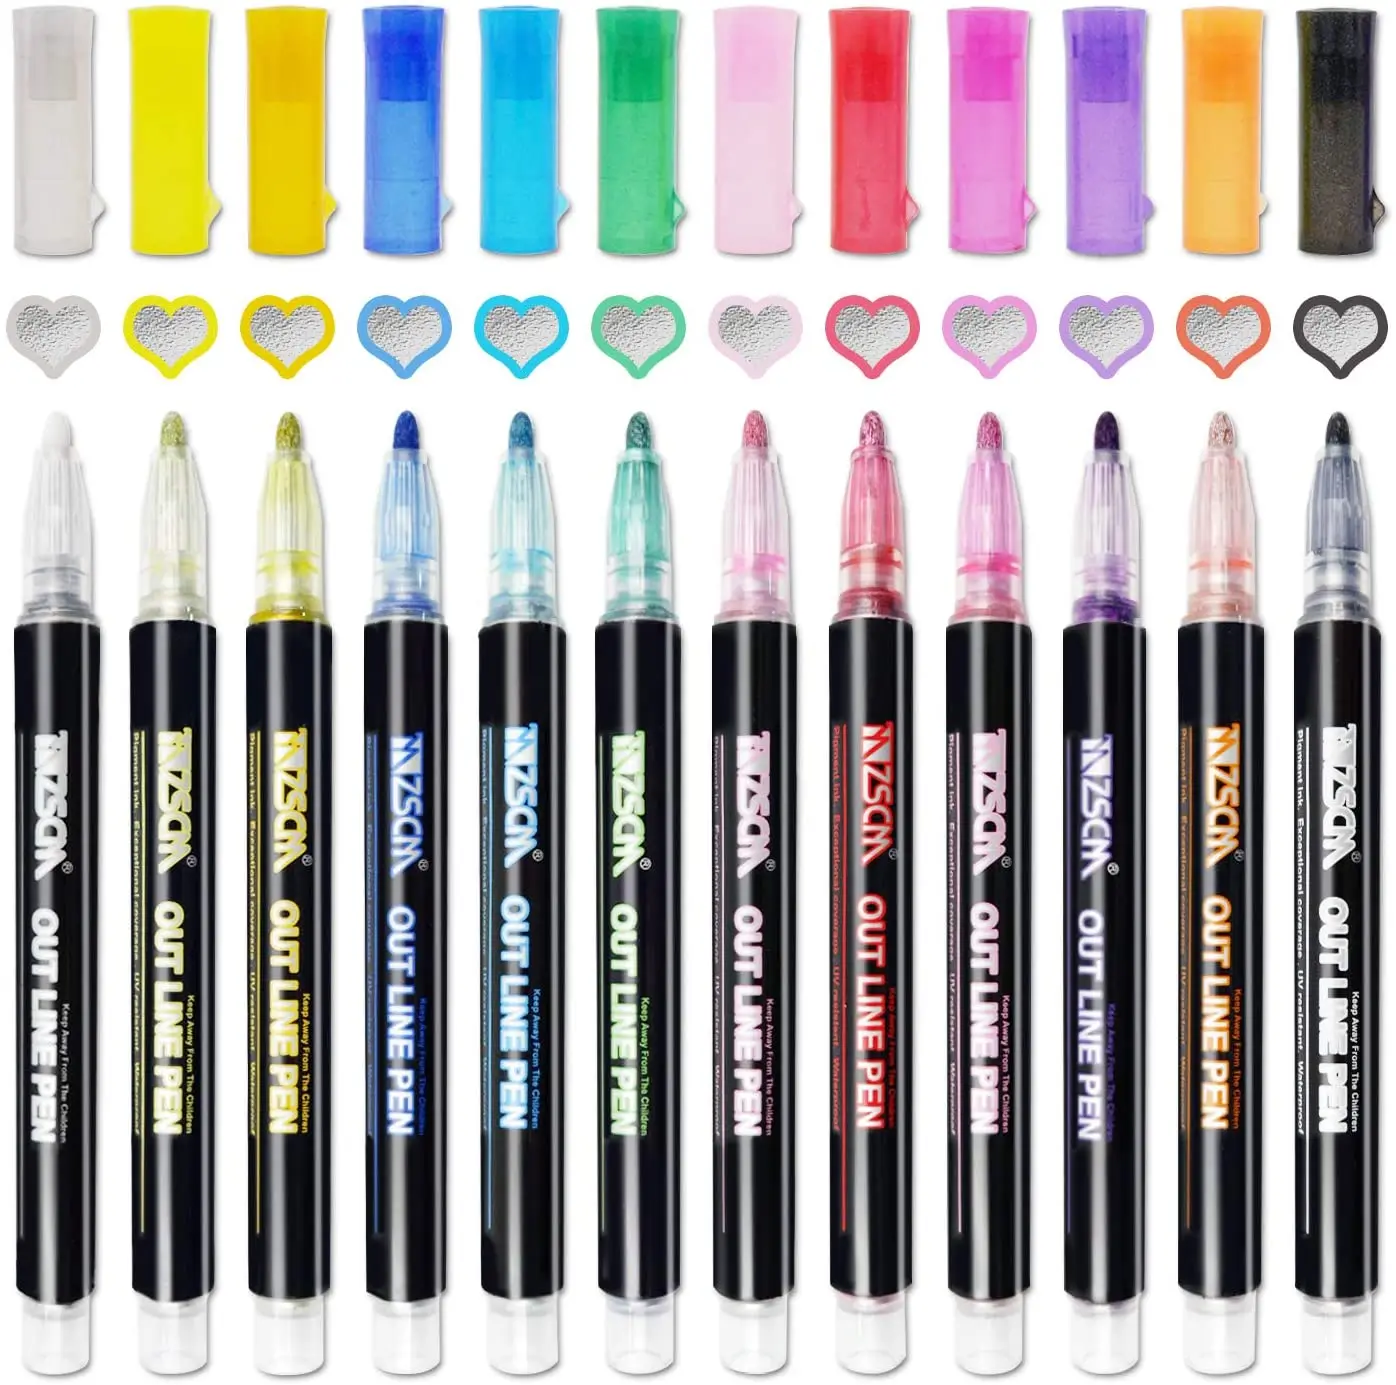 https://ae01.alicdn.com/kf/Hfd6d5d62f7f149878901202c4e0a94b8Z/Double-Line-Outline-Pens-8-12-24-36-Colours-Metallic-Markers-Glitter-Writing-Drawing-Doodle-Dazzle.jpg